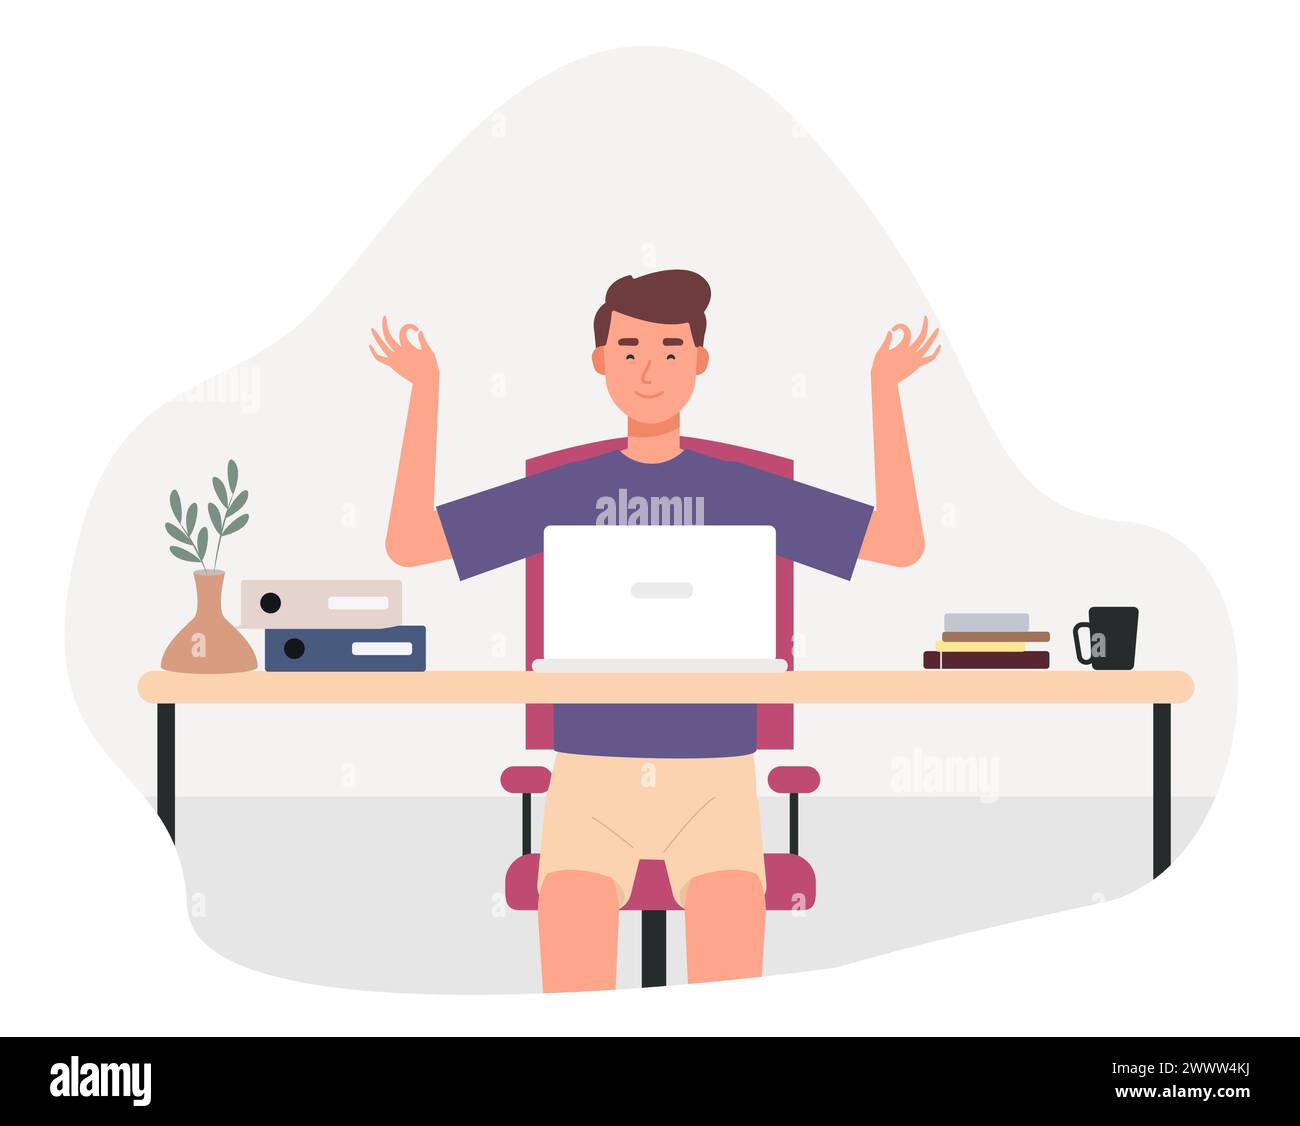 Work from Home Set Vector Illustration, Online Meeting Set Concept Flat Design, Freelancer Work at Home Template Illustrazione Vettoriale